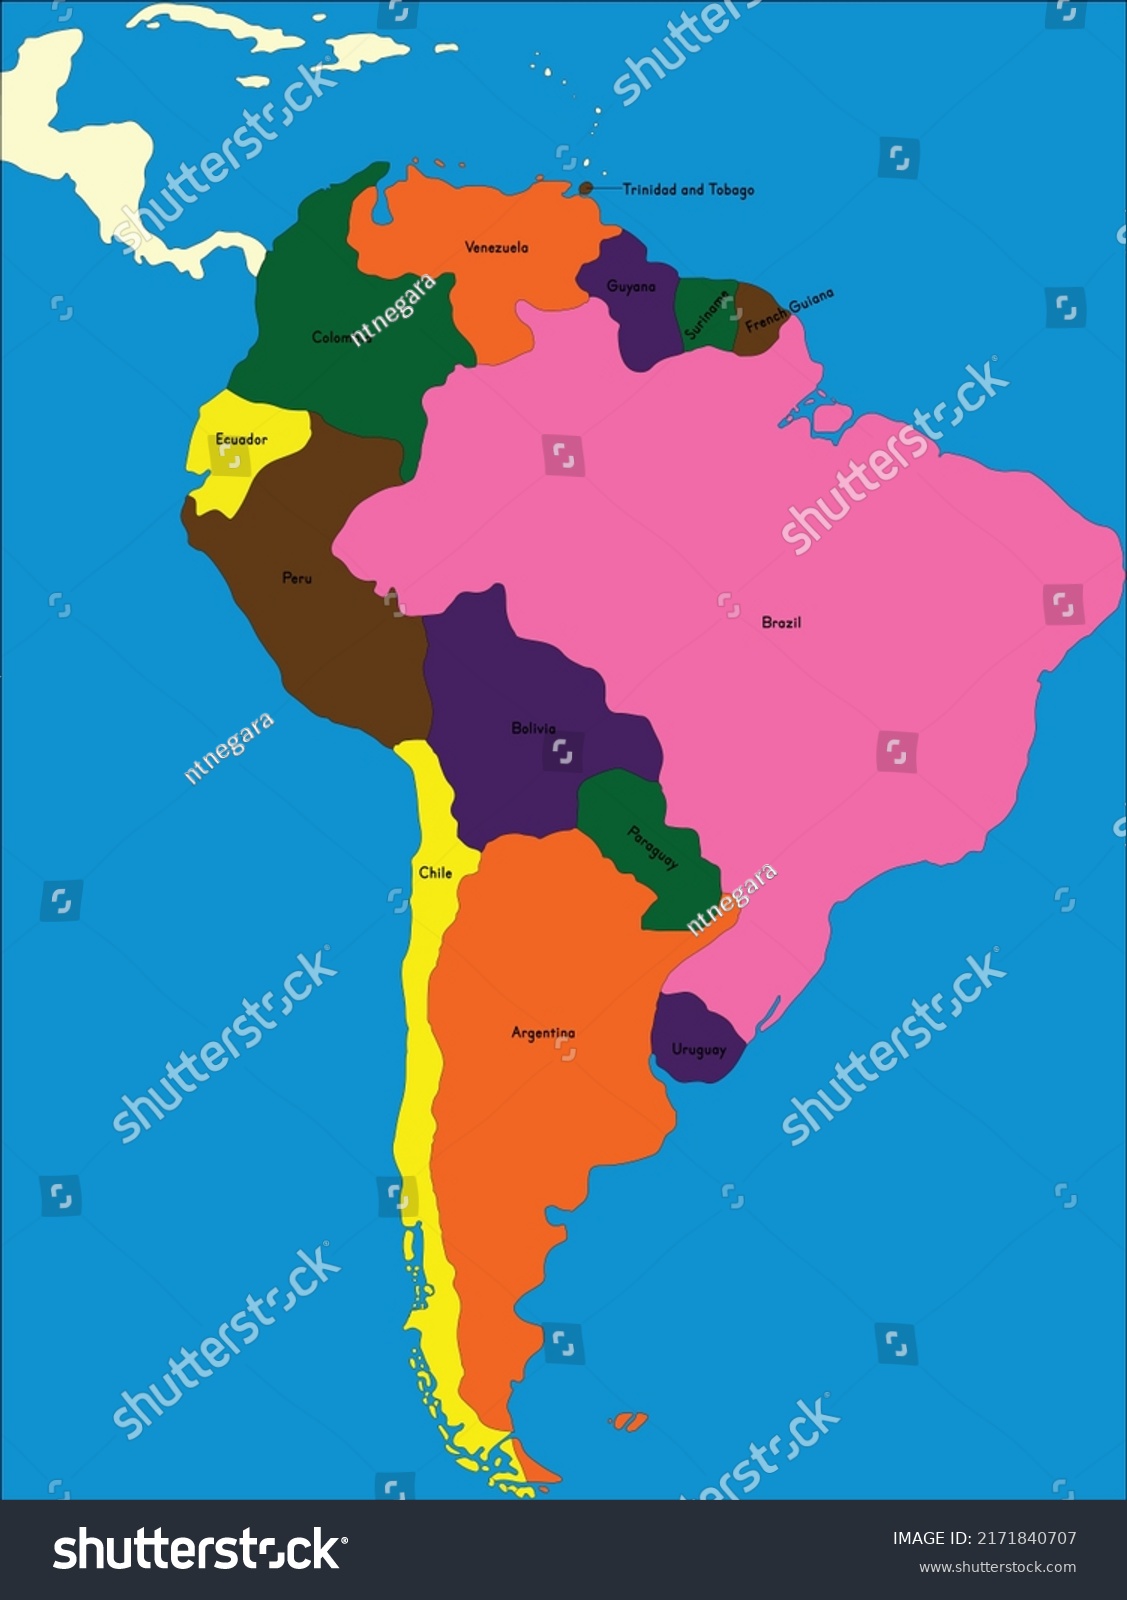 south-america-countries-map-montessori-learning